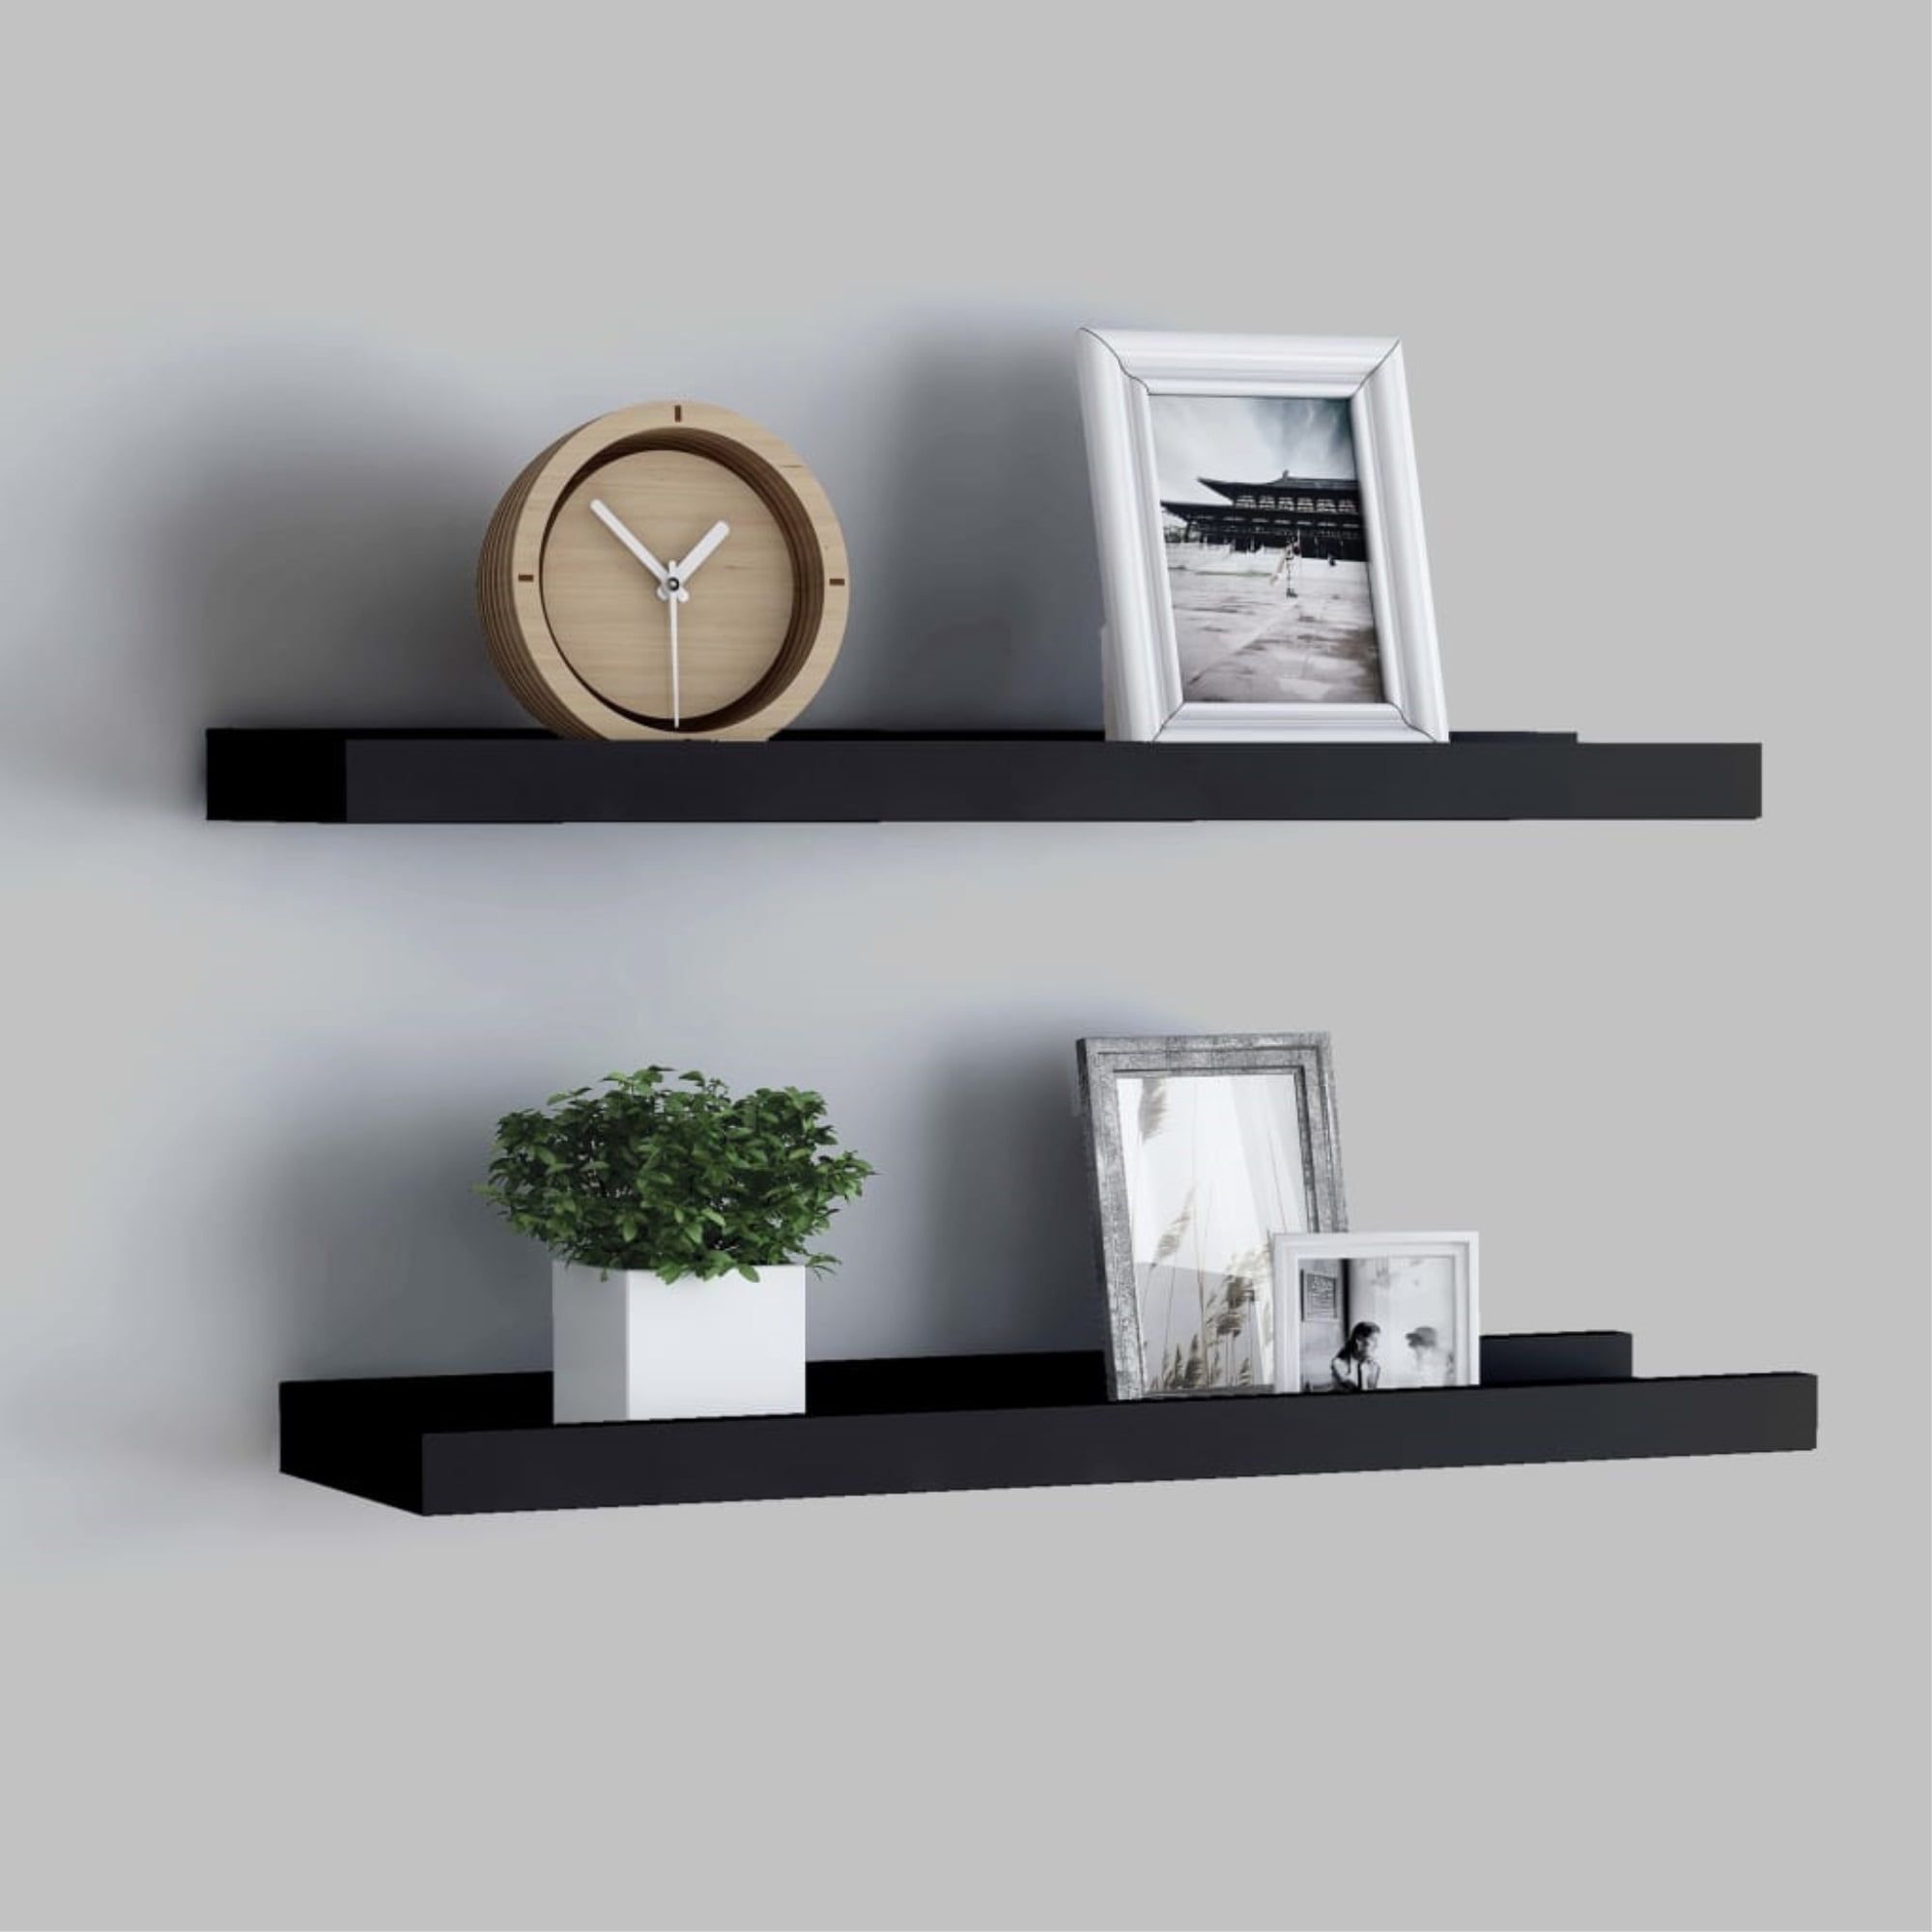 2x Floating Wall Display Shelves Book Storage Hanging Shelf Home Decor All Sizes 